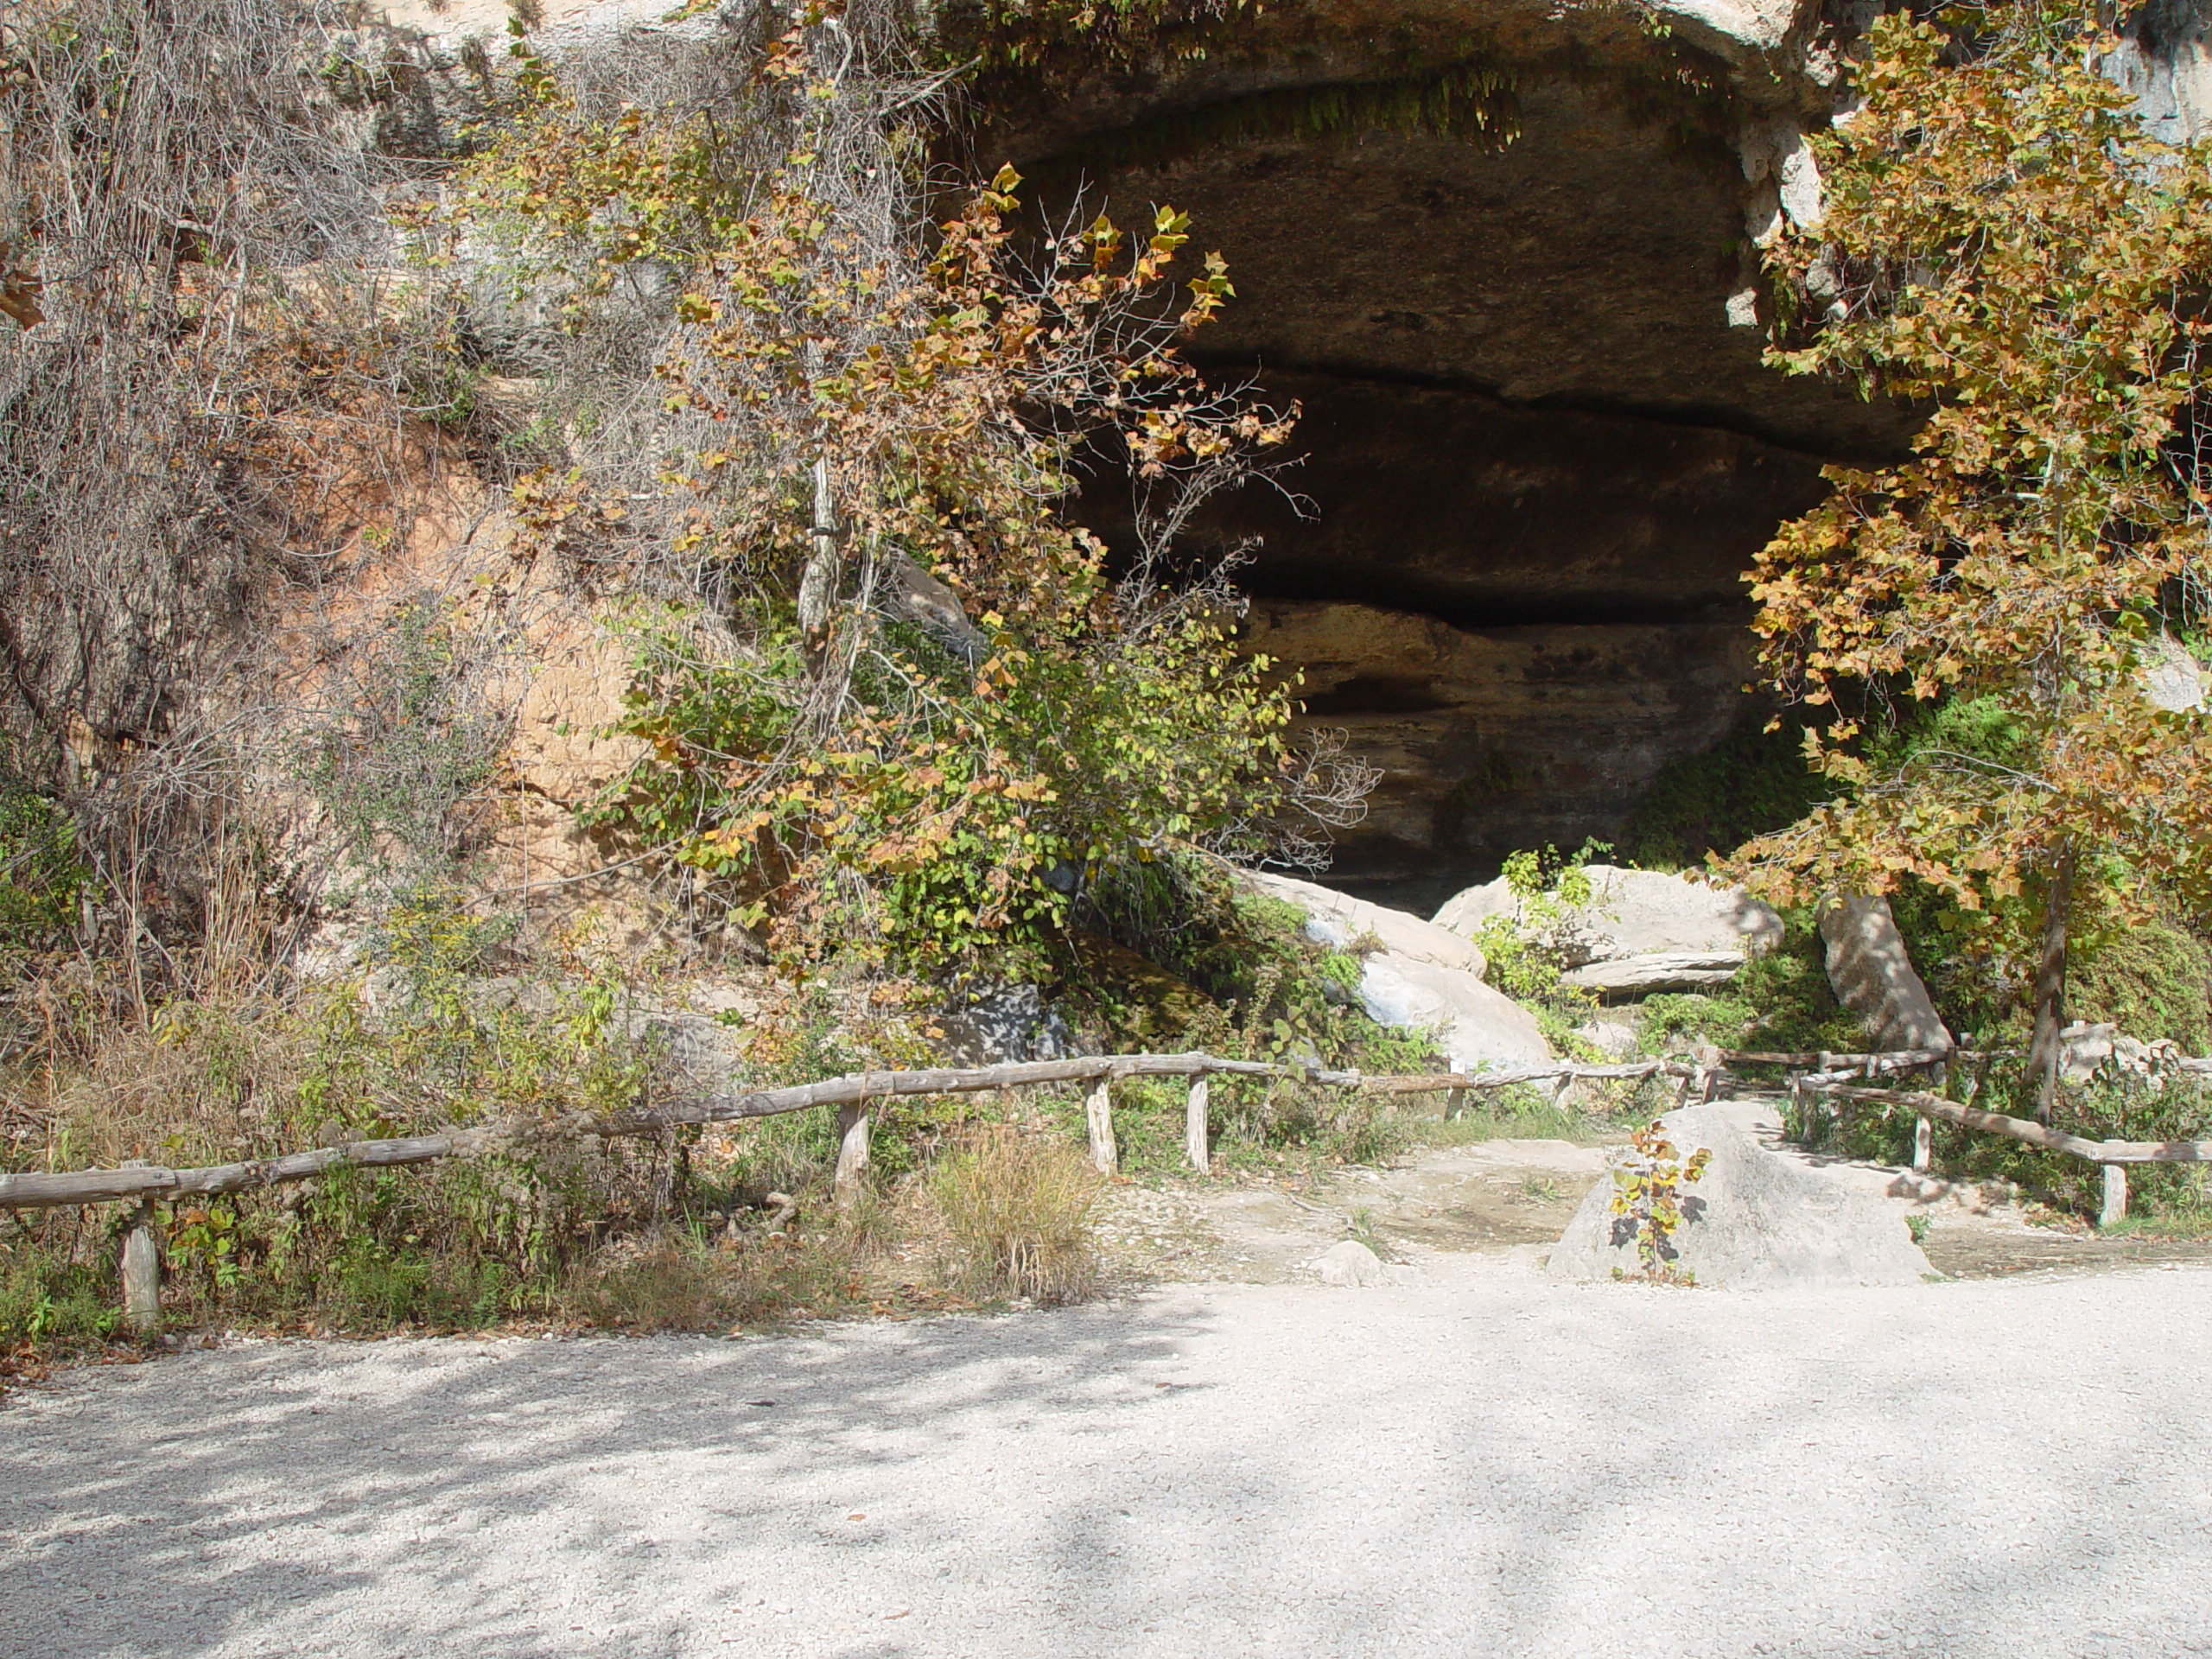 Hiking at Hamilton Pool Preserve with Stan and DeNae